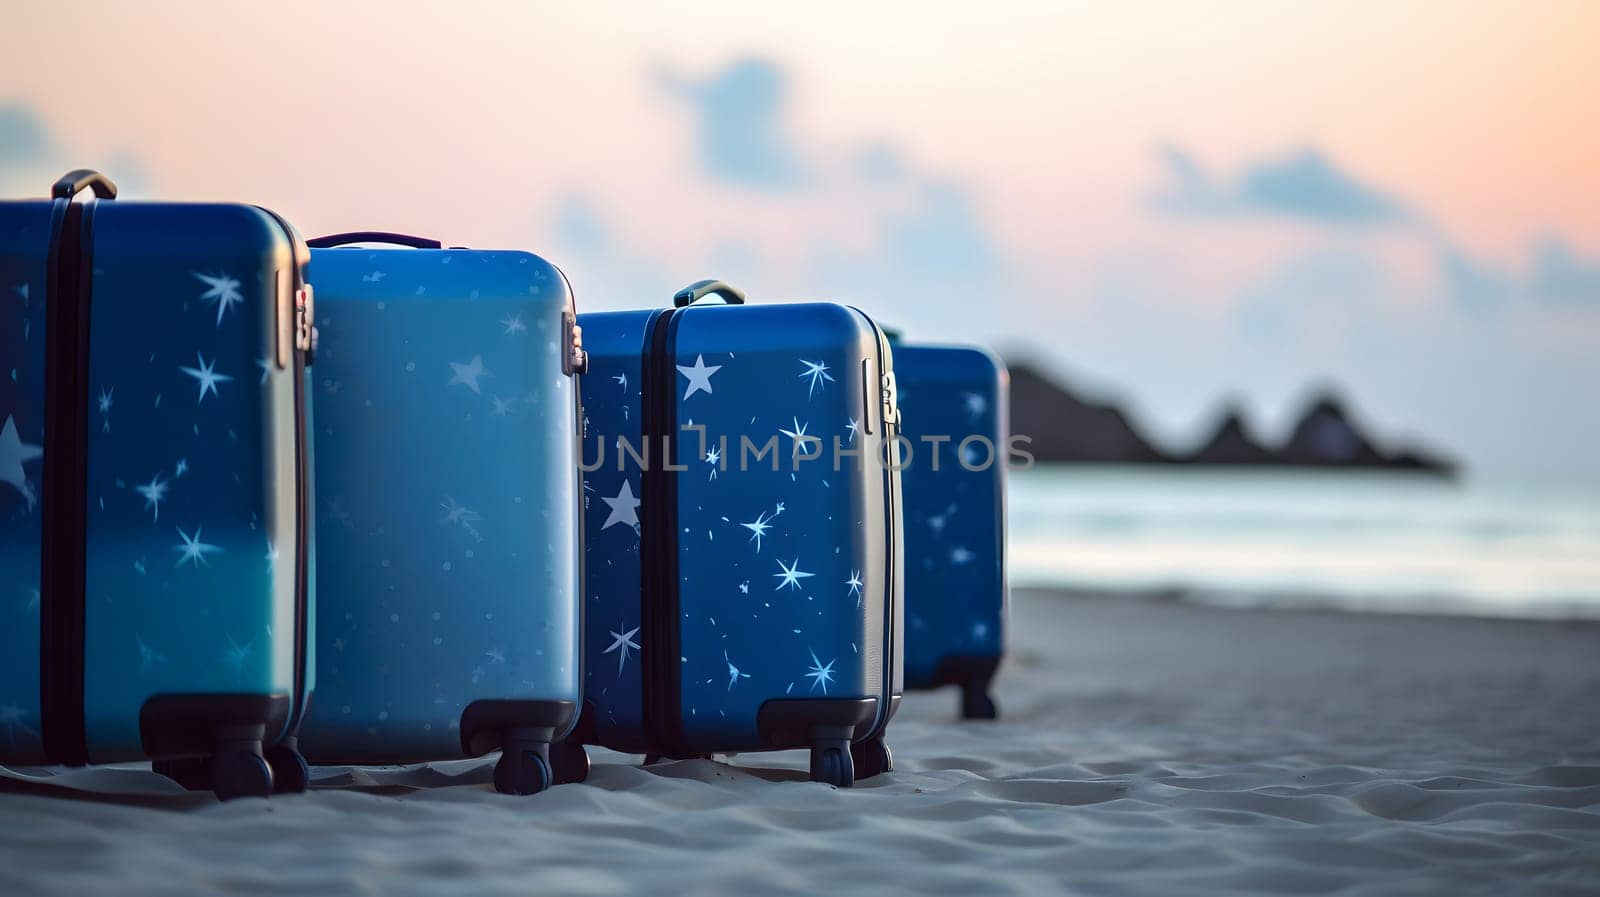 Few modern blue suitcases on tropical resort beach at morning, neural network generated art by z1b